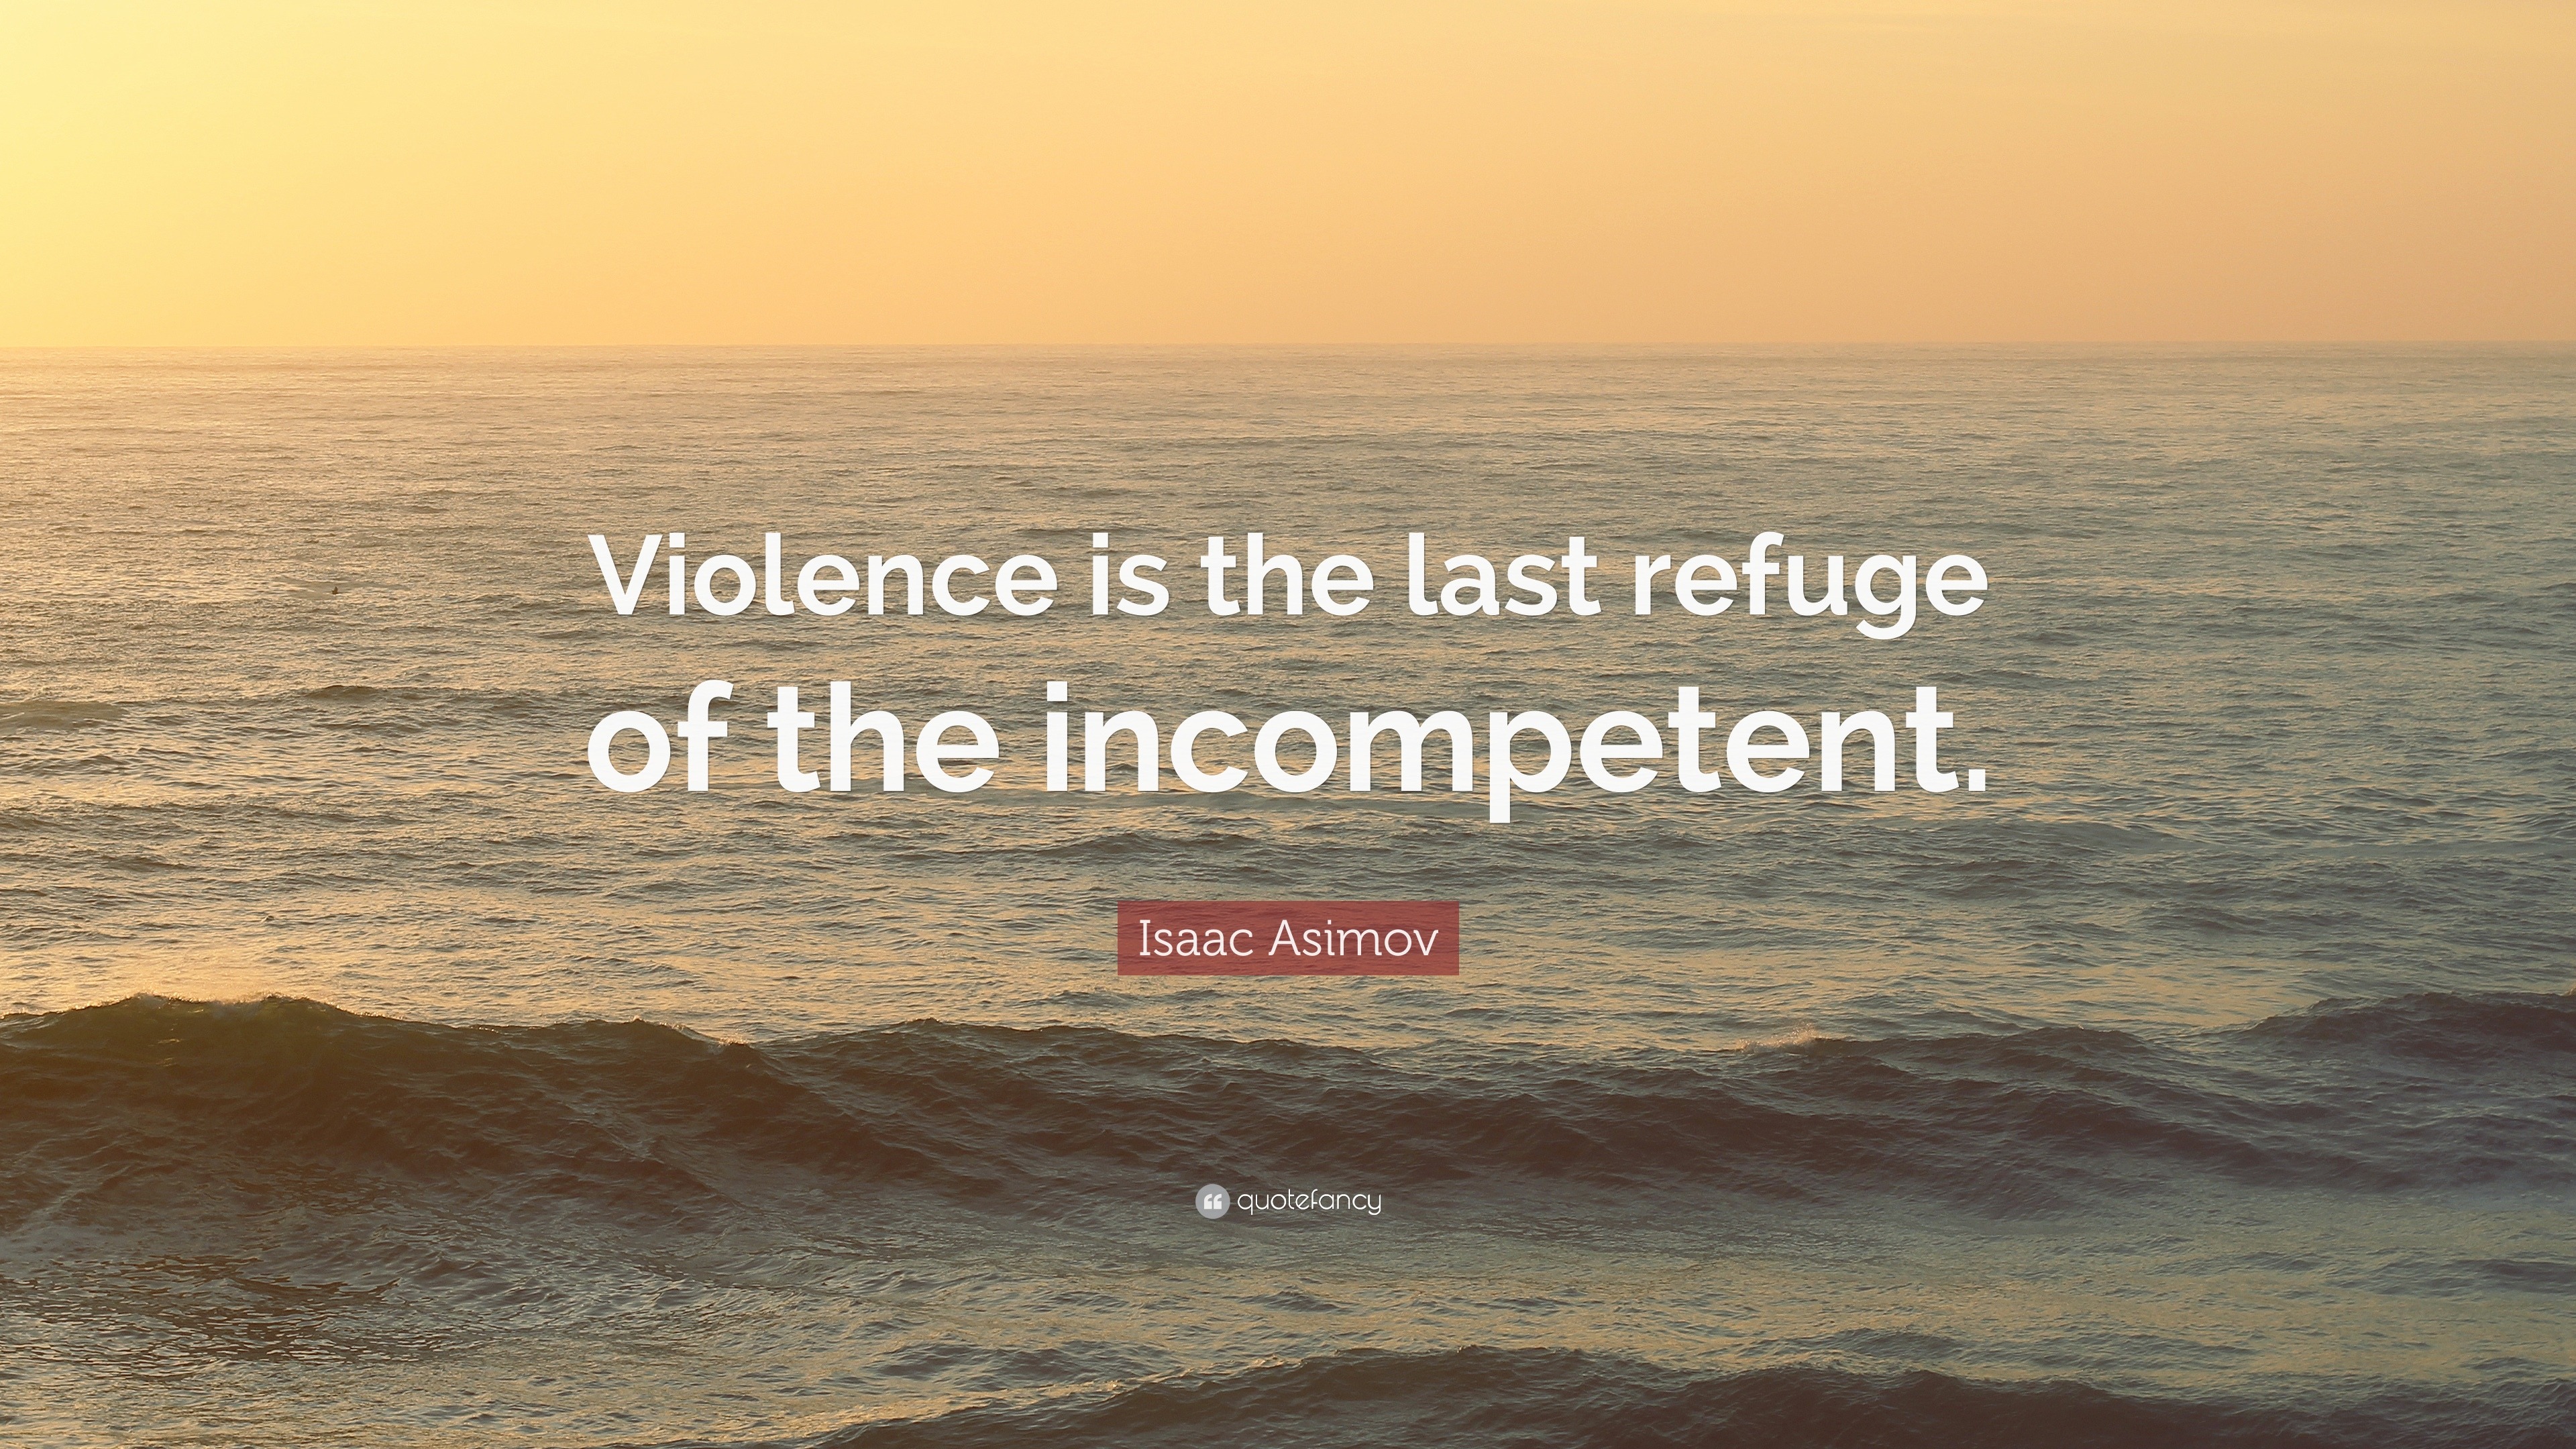 essay on violence is the last refuge of the incompetent